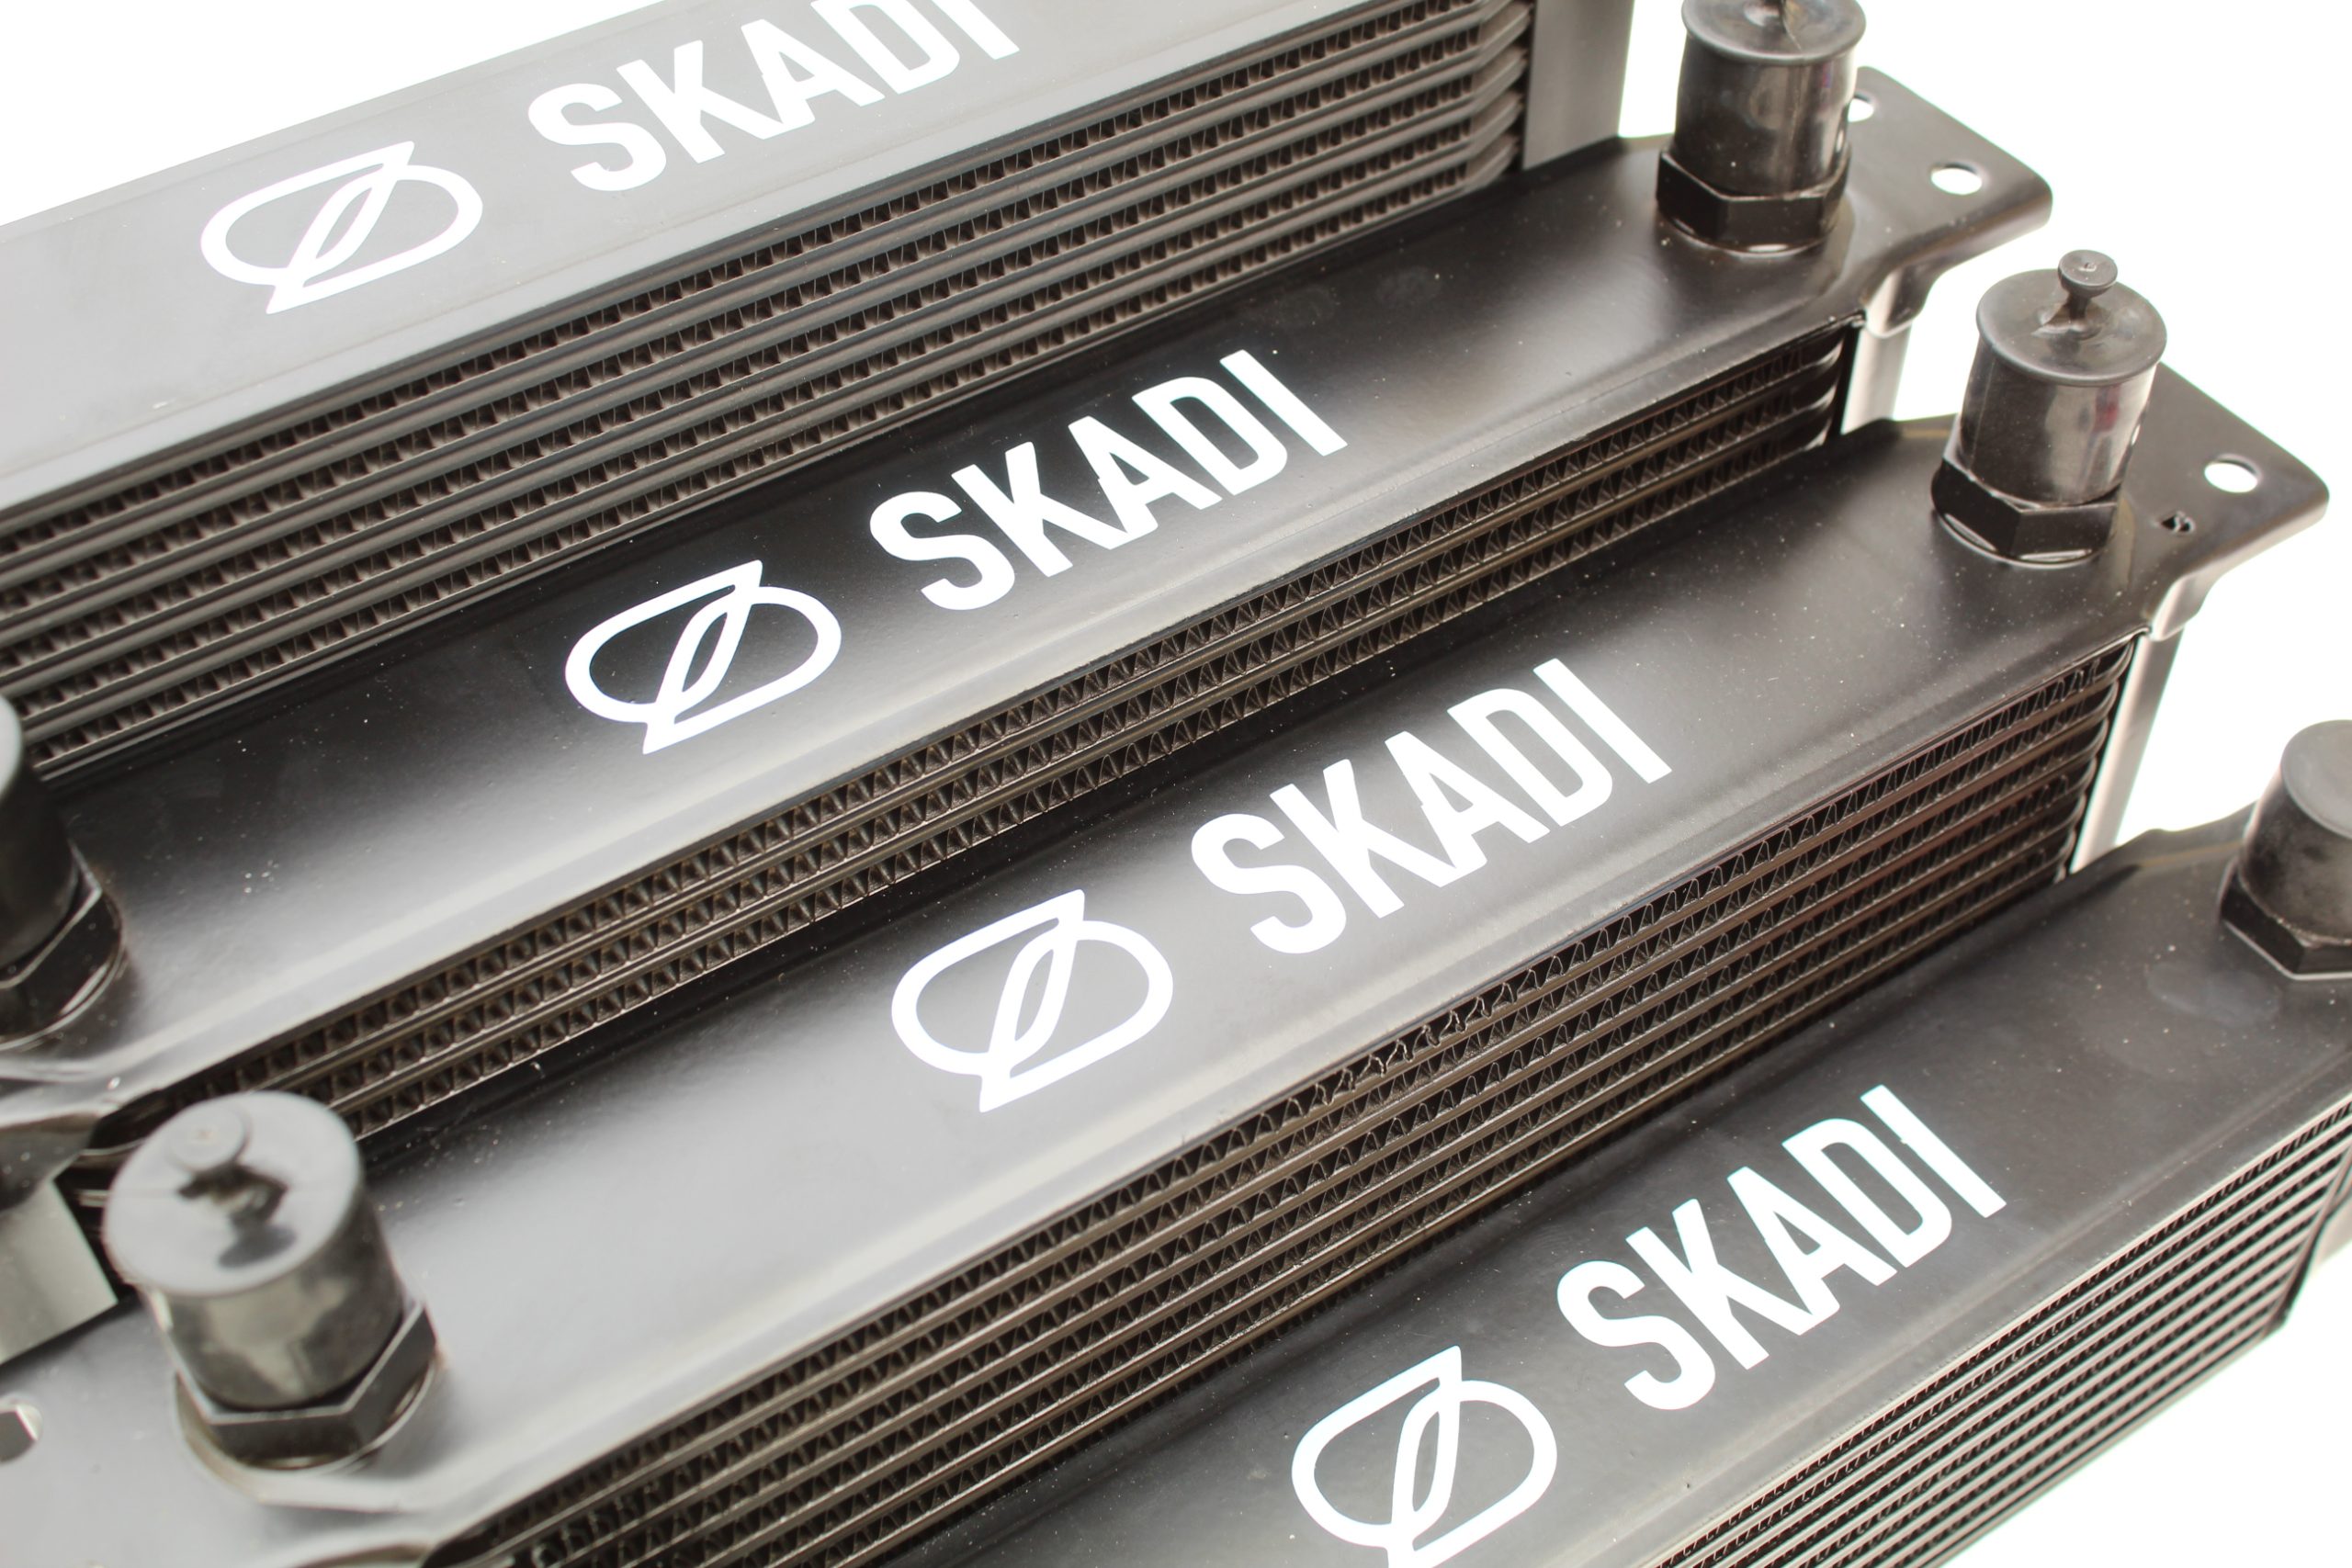 Skadi Cooling 16 Row Oil Cooler, AN-10 Size